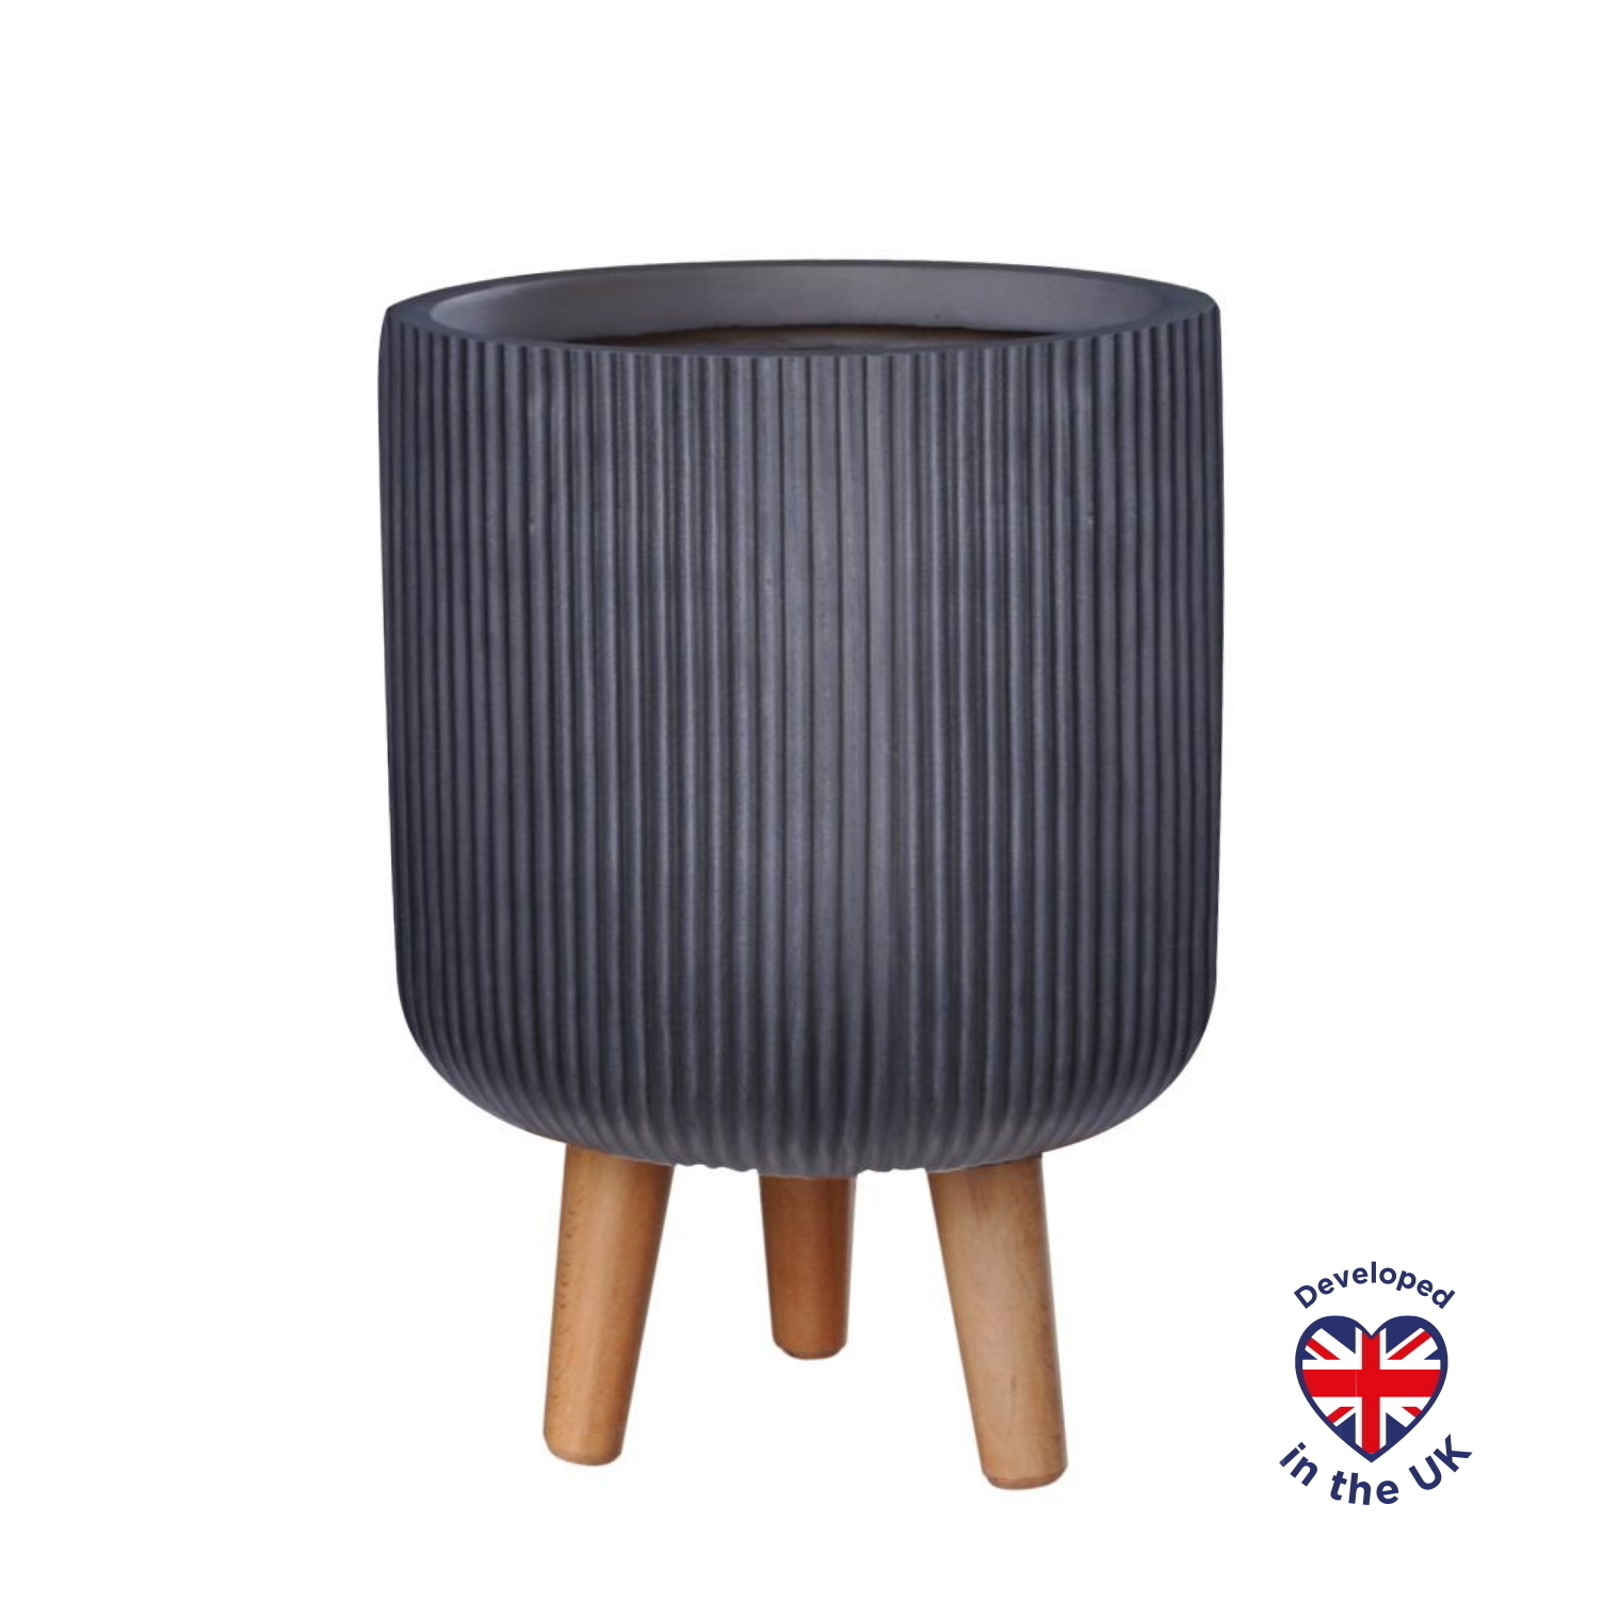 Ribbed Black Cylinder Indoor Planter with Legs D25.5 H36 cm, 10.4 ltrs Cap.